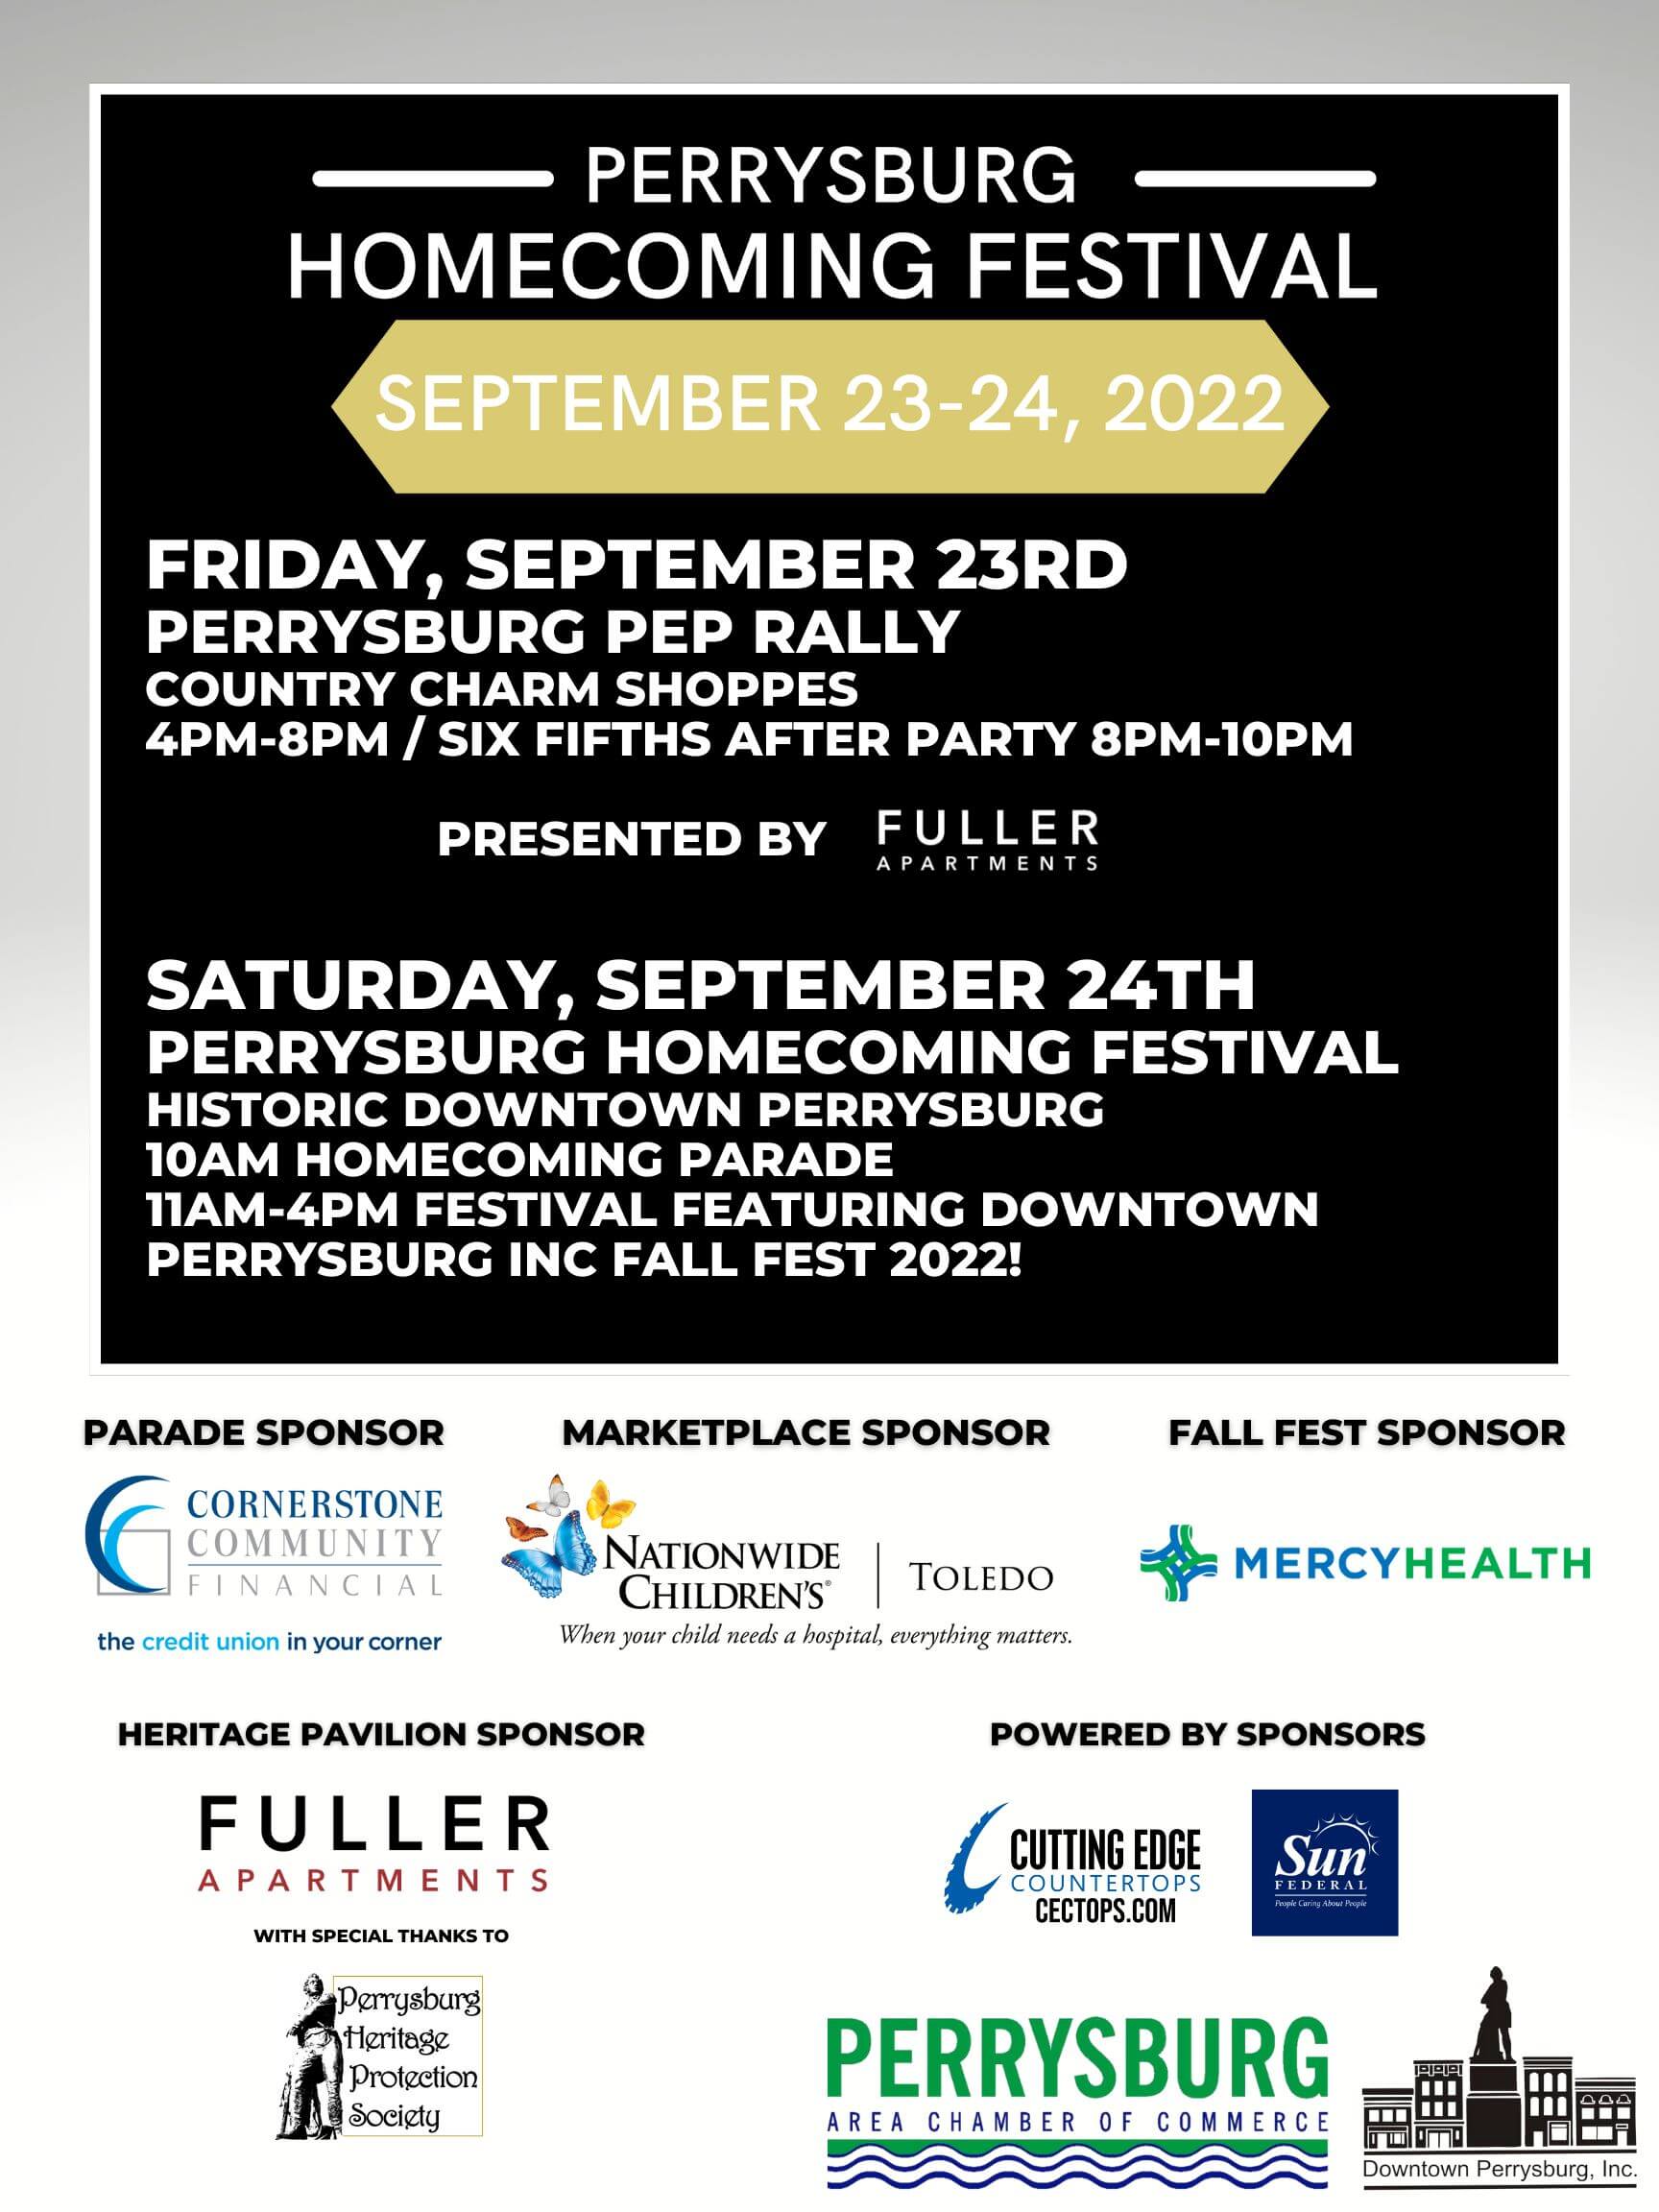 Perrysburg Homecoming Festival 2022 Poster